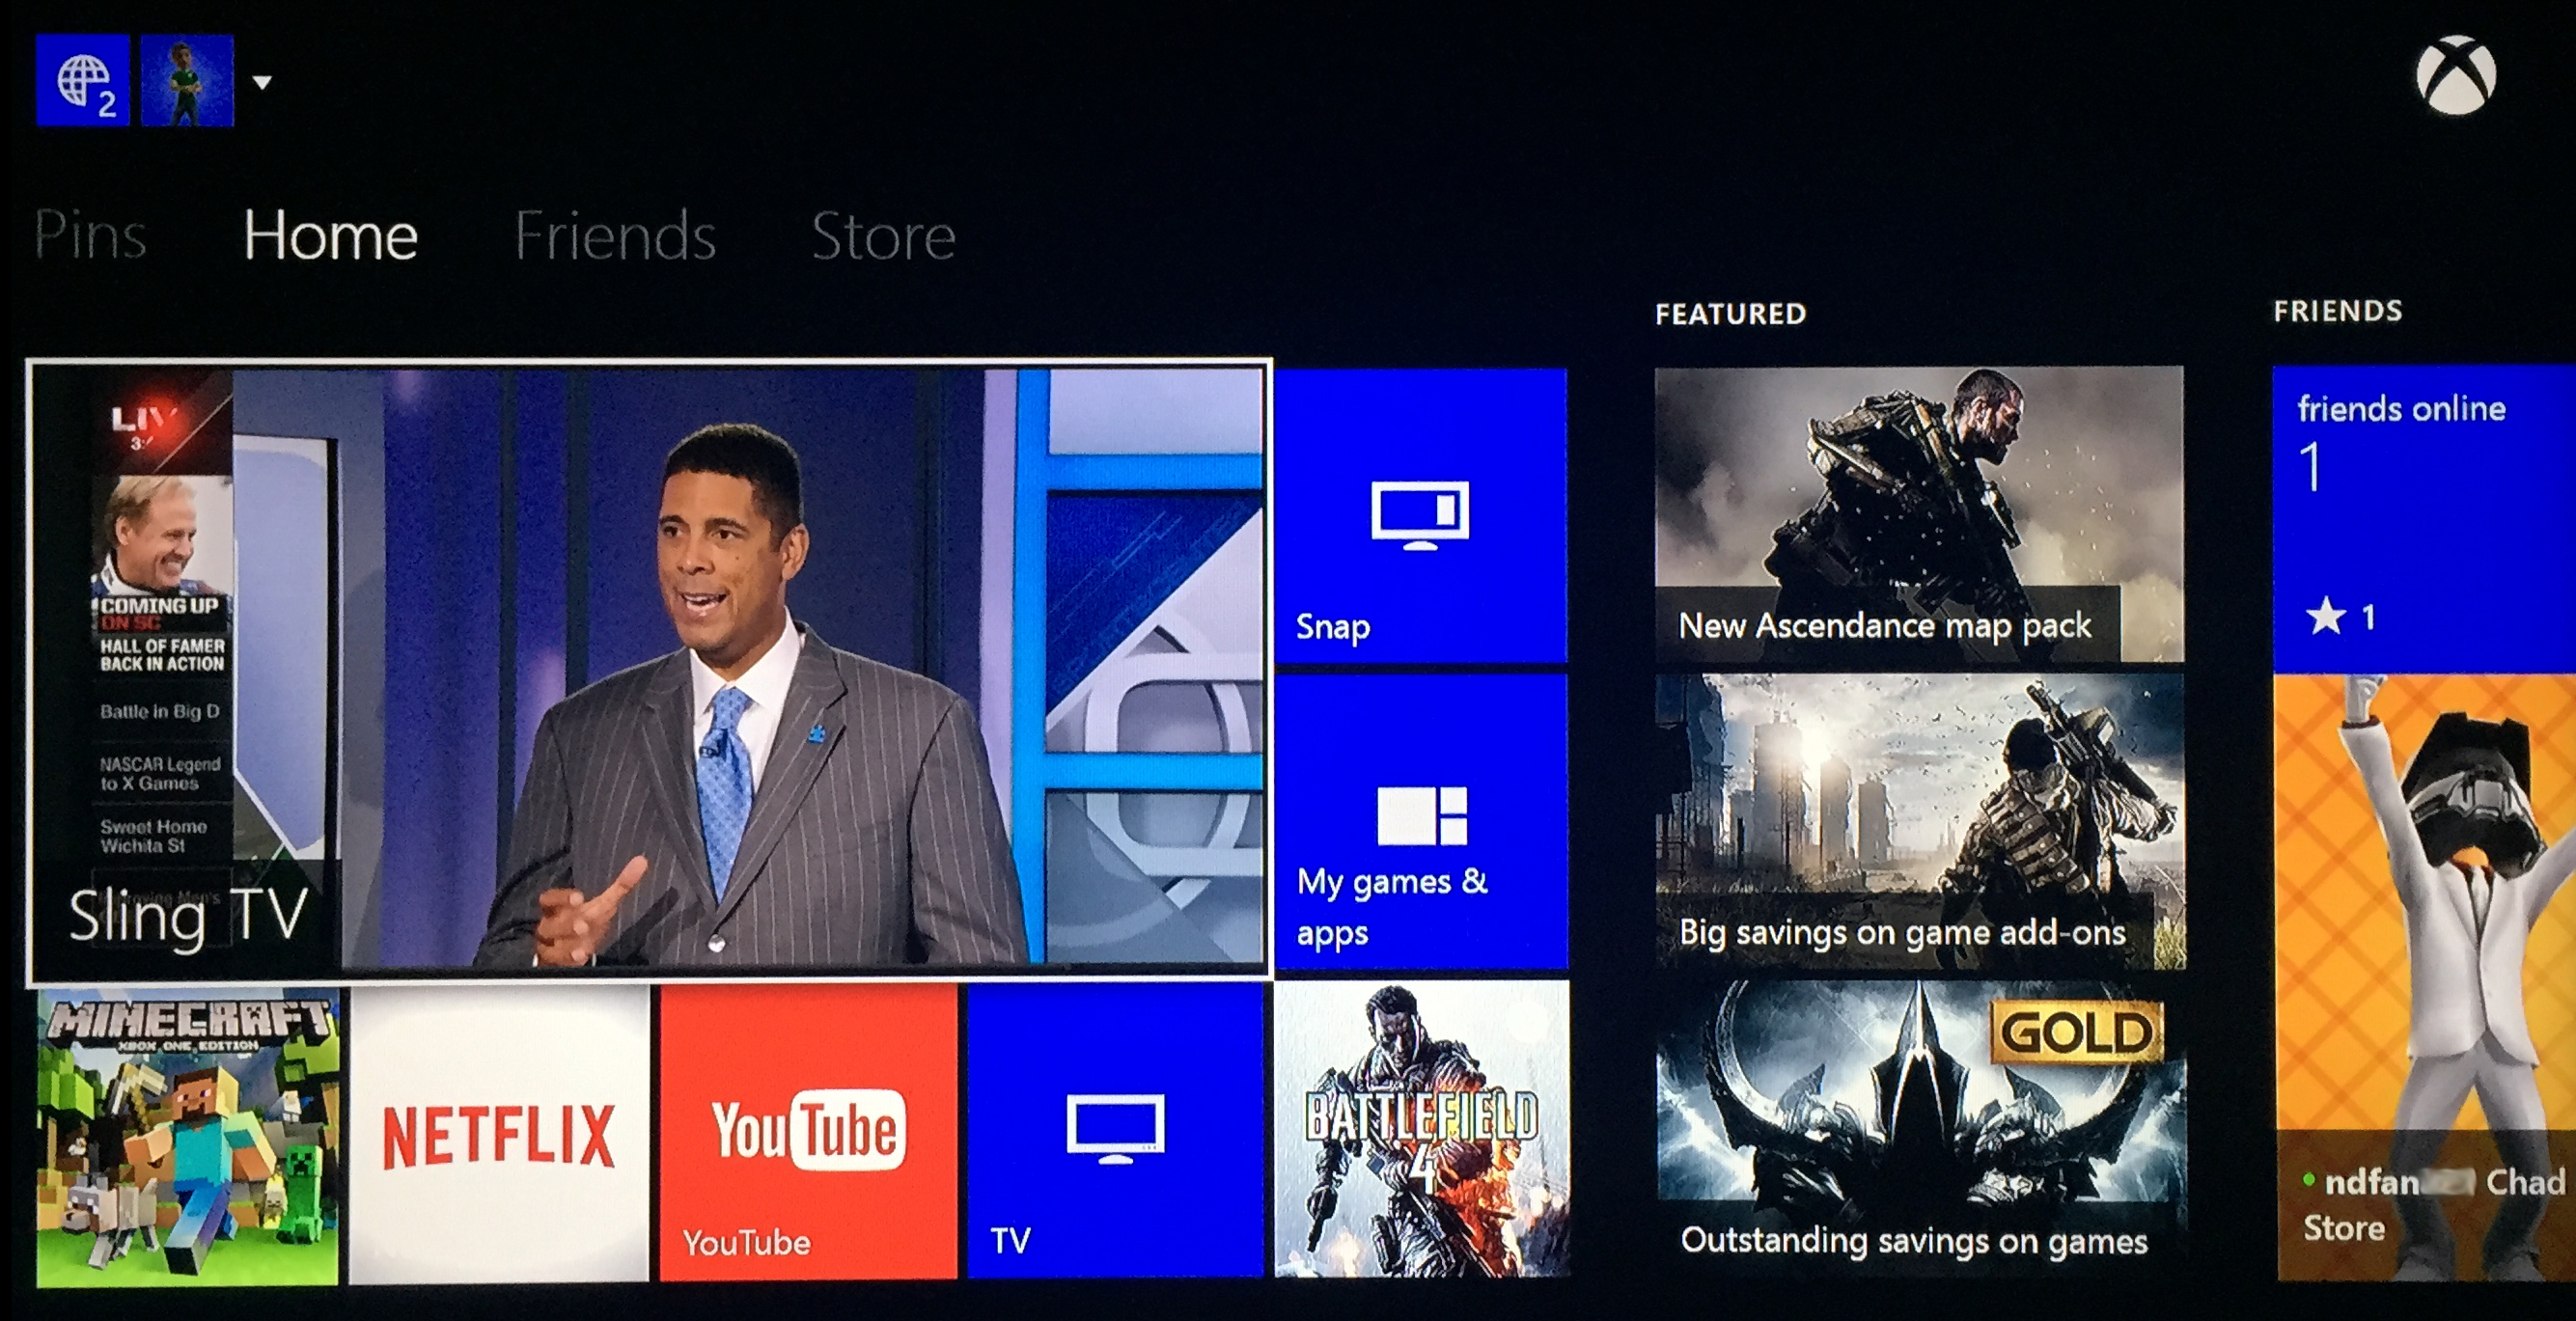 Review Does Sling TVs arrival on the Xbox One make Microsofts console king of the living room?